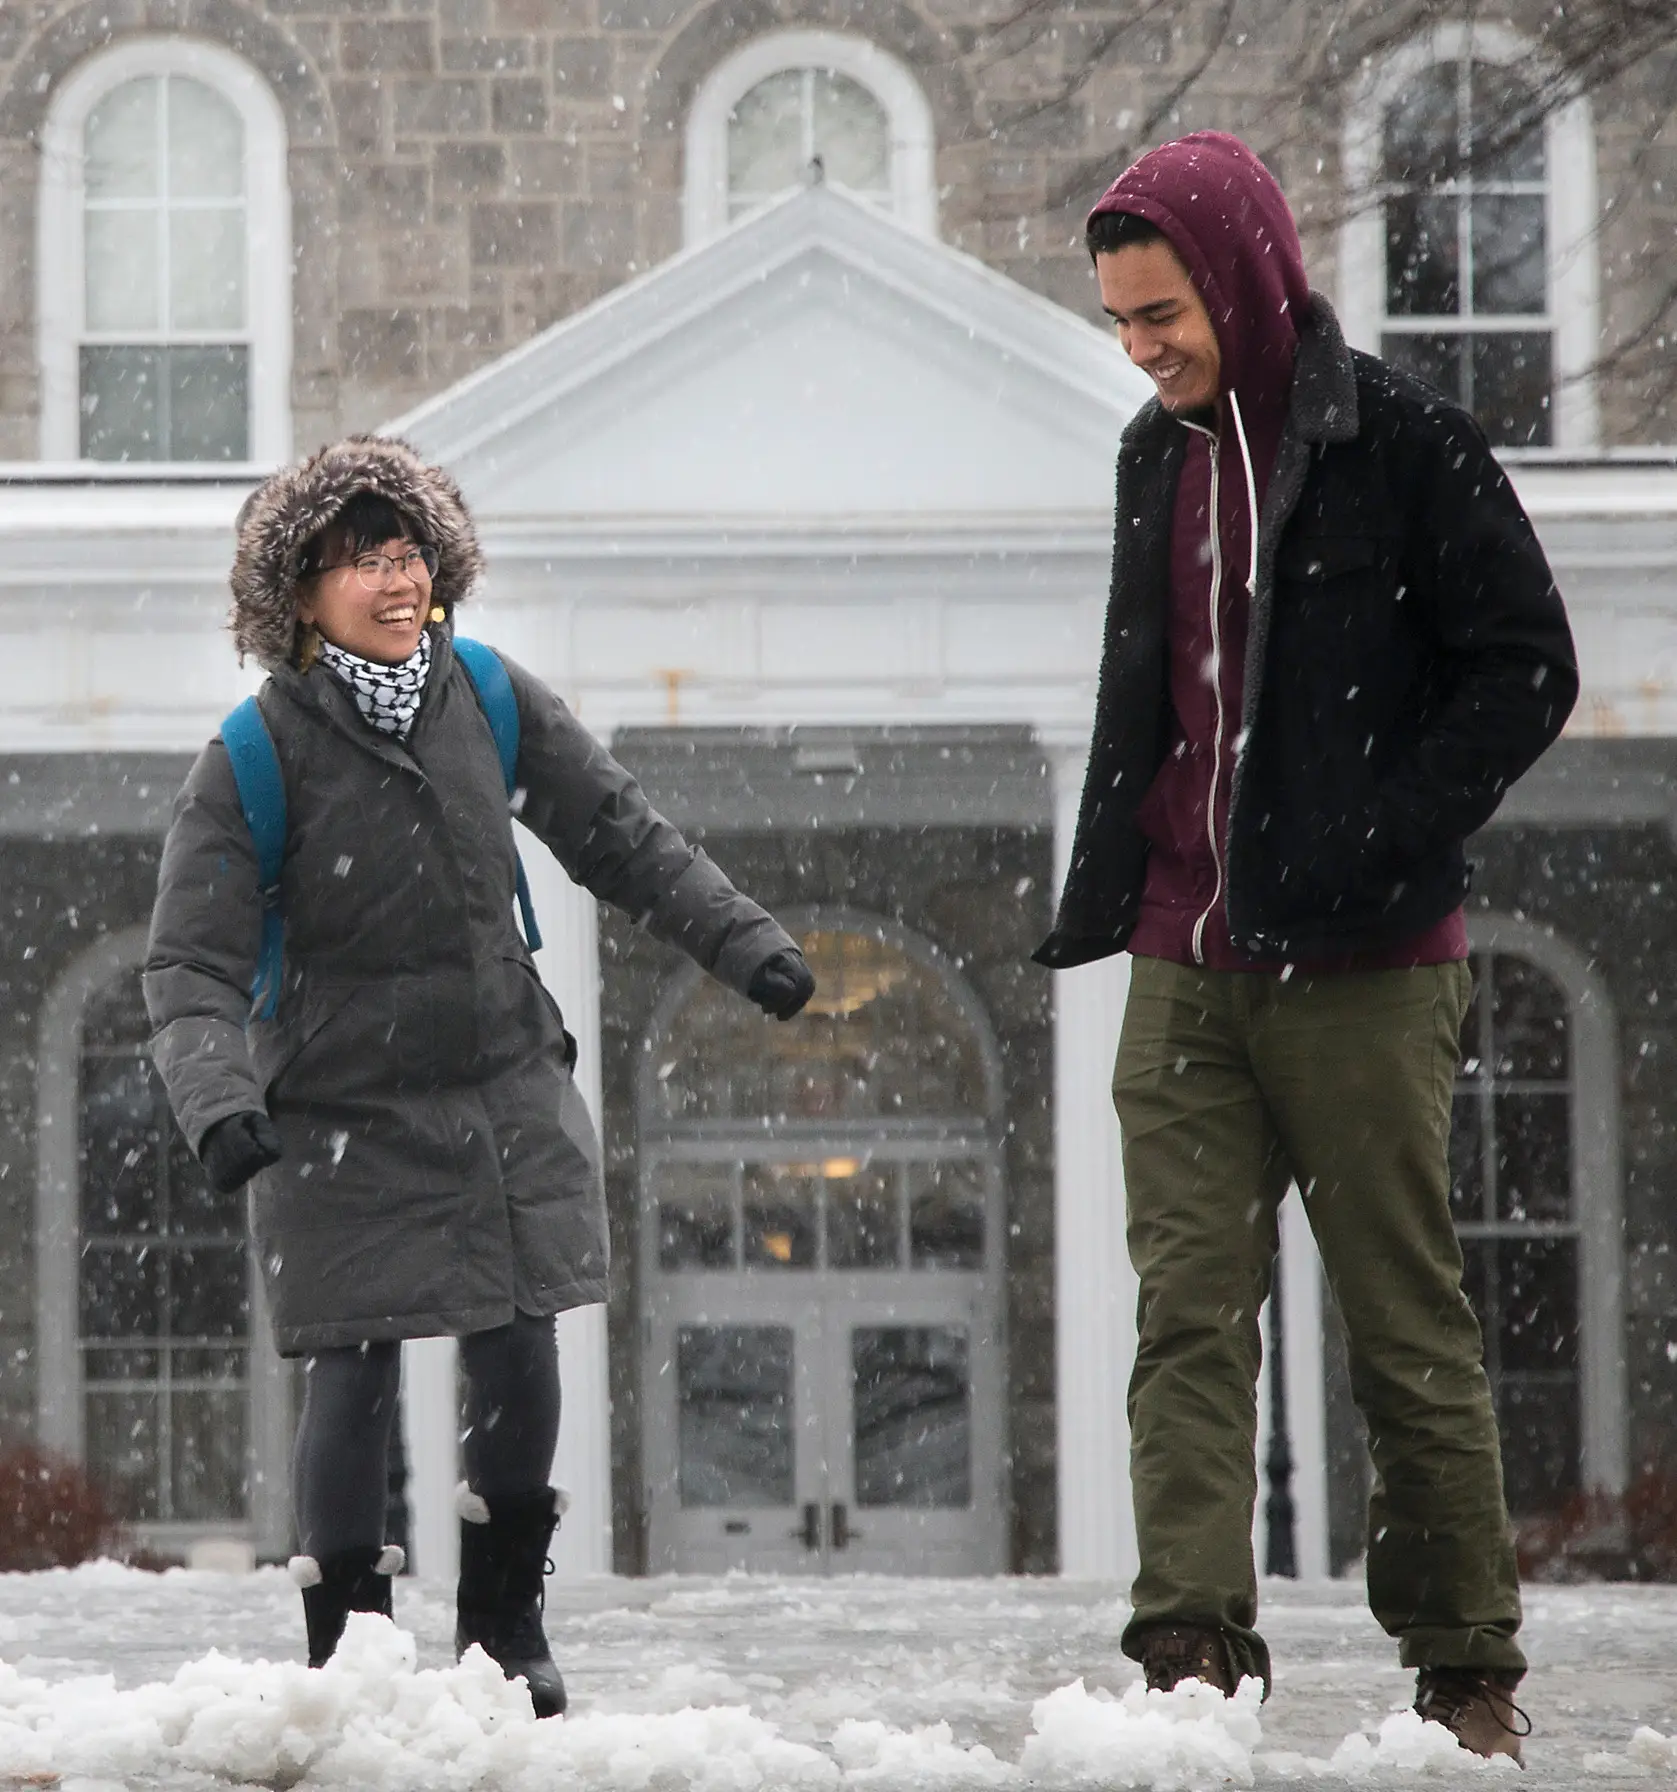 Two students smiling and laughing in snow